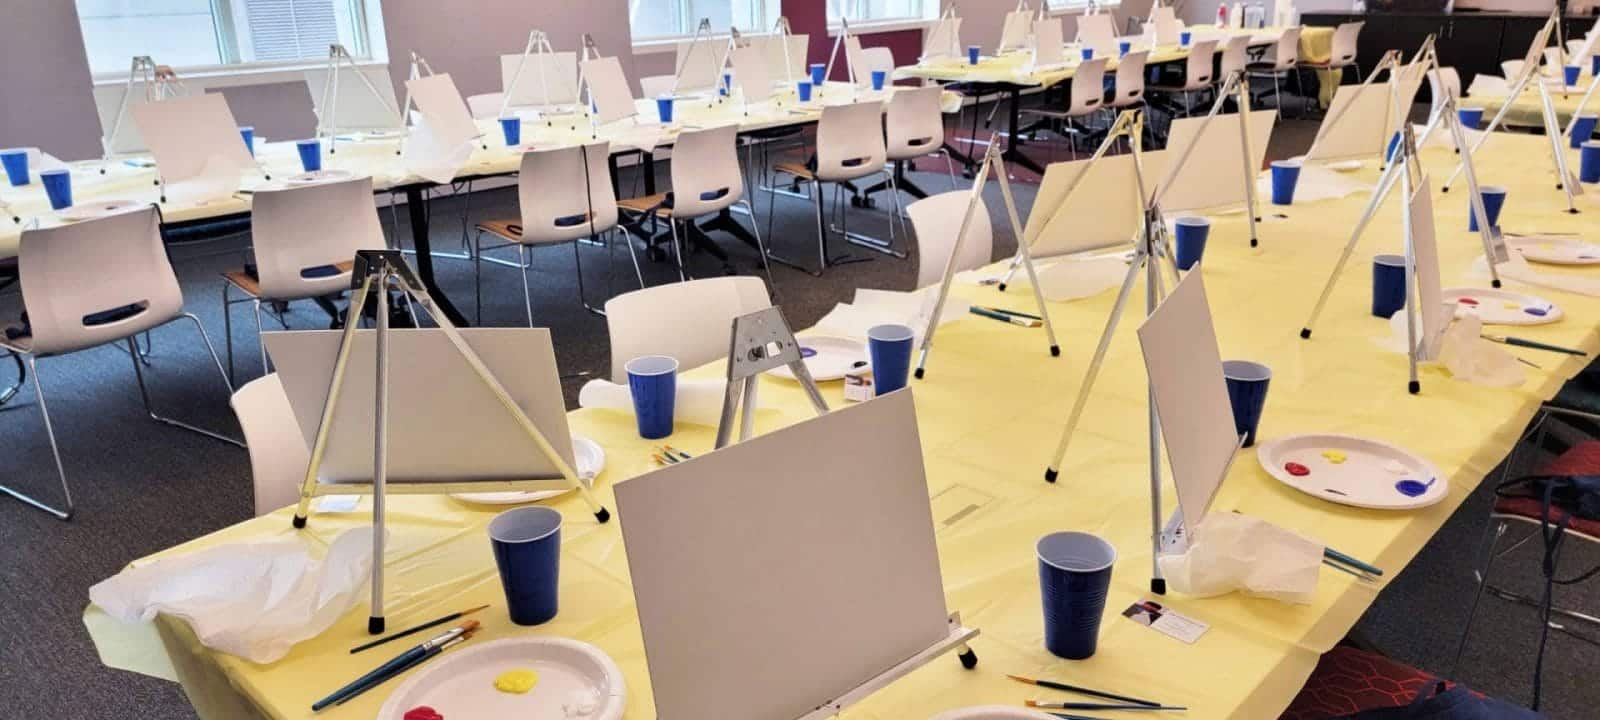 The best paint and sip experience in DC featuring a room full of tables with easels and paints.